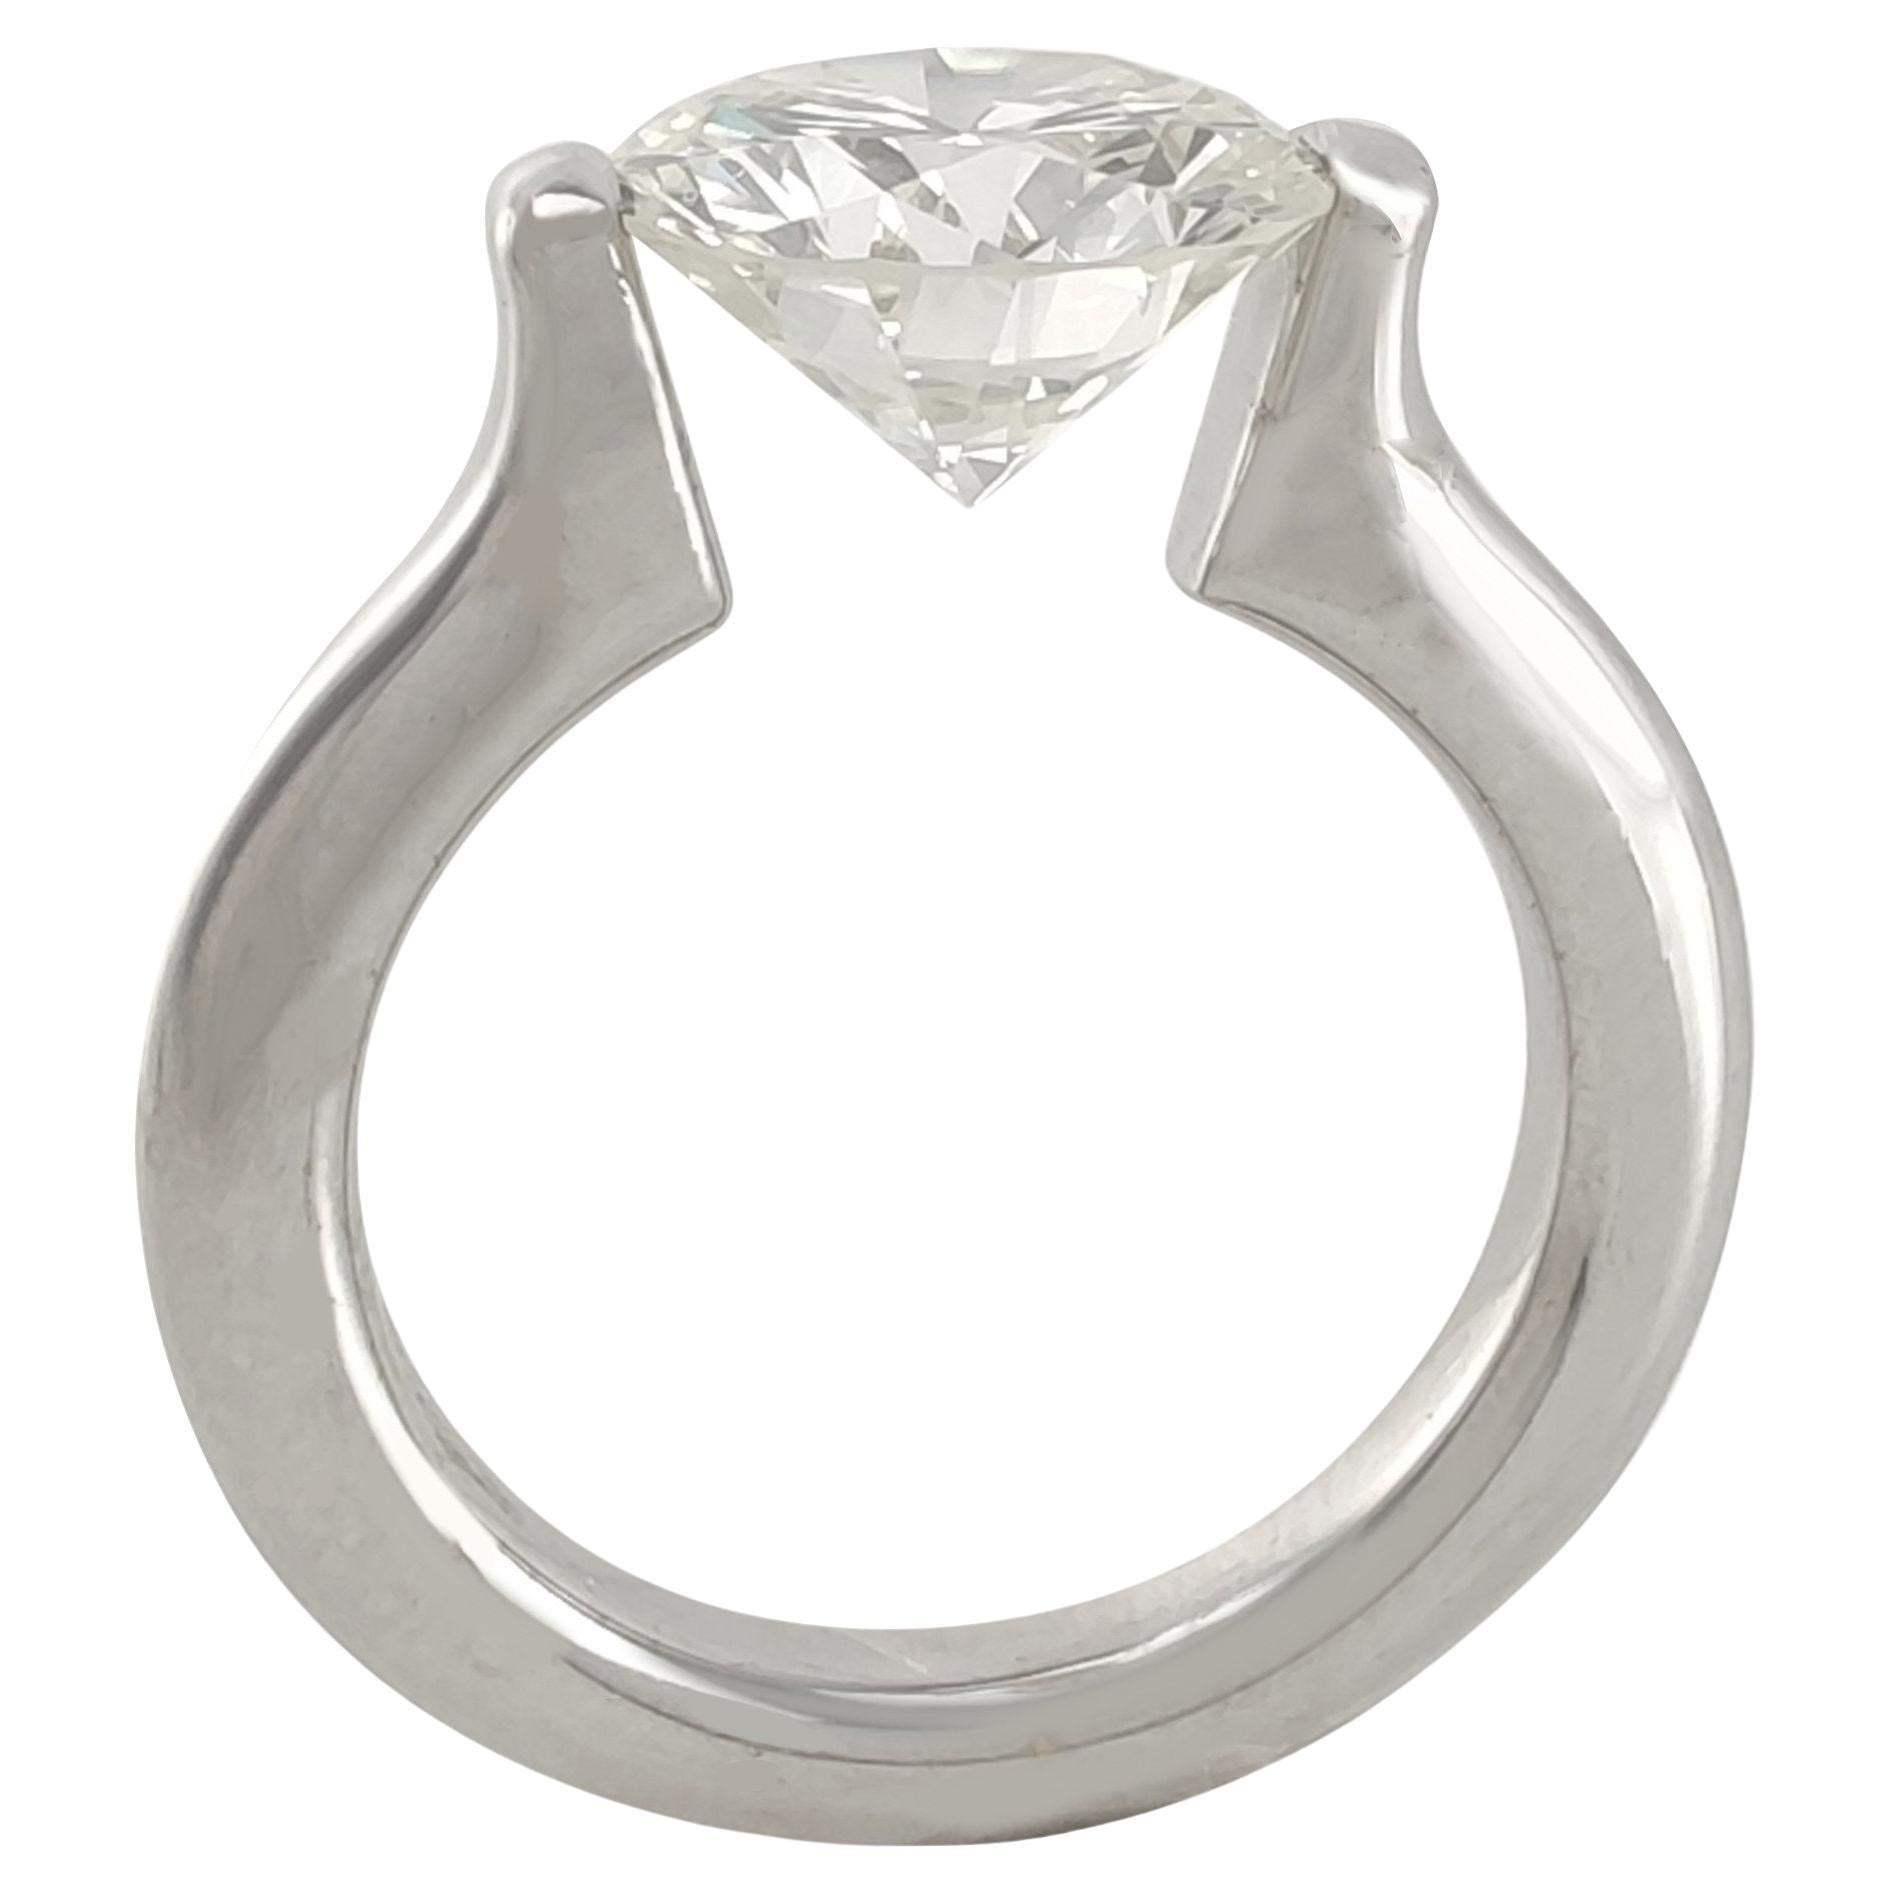 This ring is handmade in 18-karat white gold and is a true work of art. With a spectacular 4-carat diamond mounted in the air, it allows light to pass through the diamond and highlight its brilliance and beauty. This ring is perfect for any special